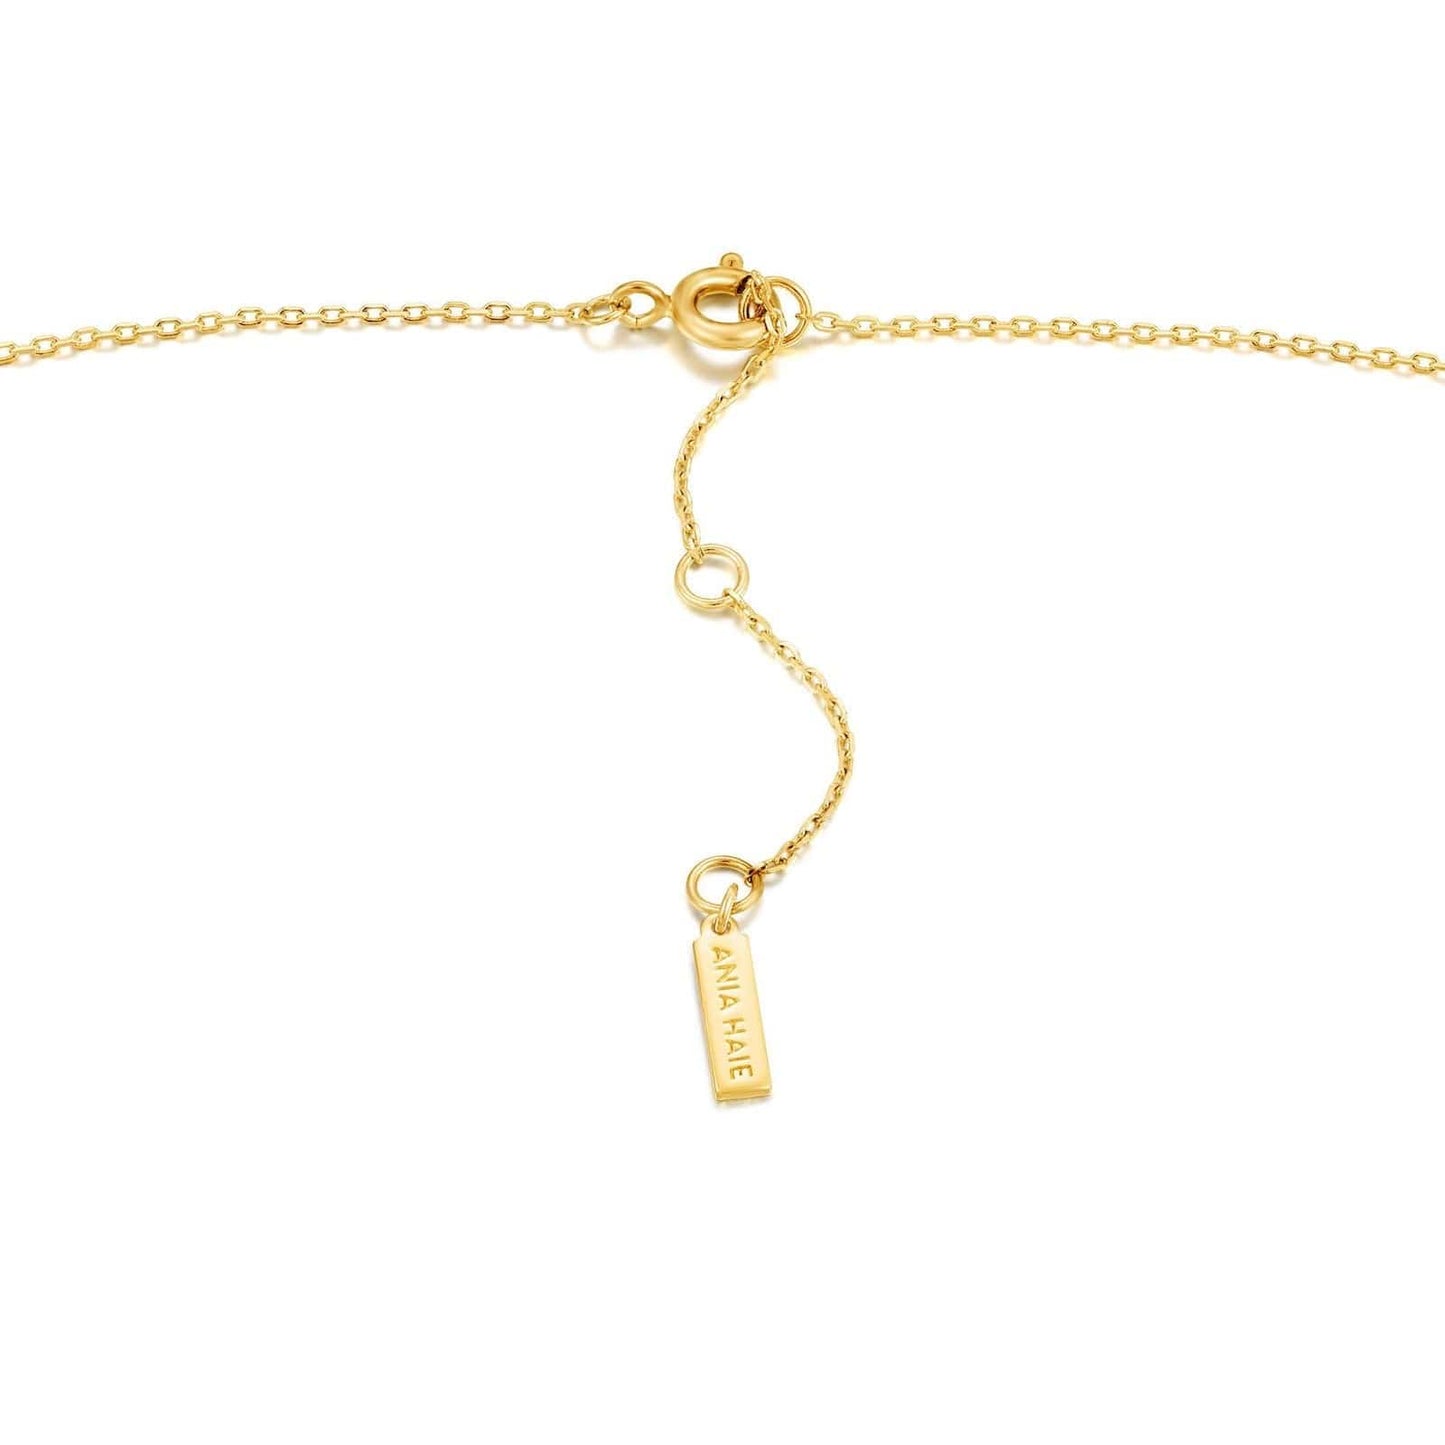 NKL-GPL Gold Midnight Y Necklace